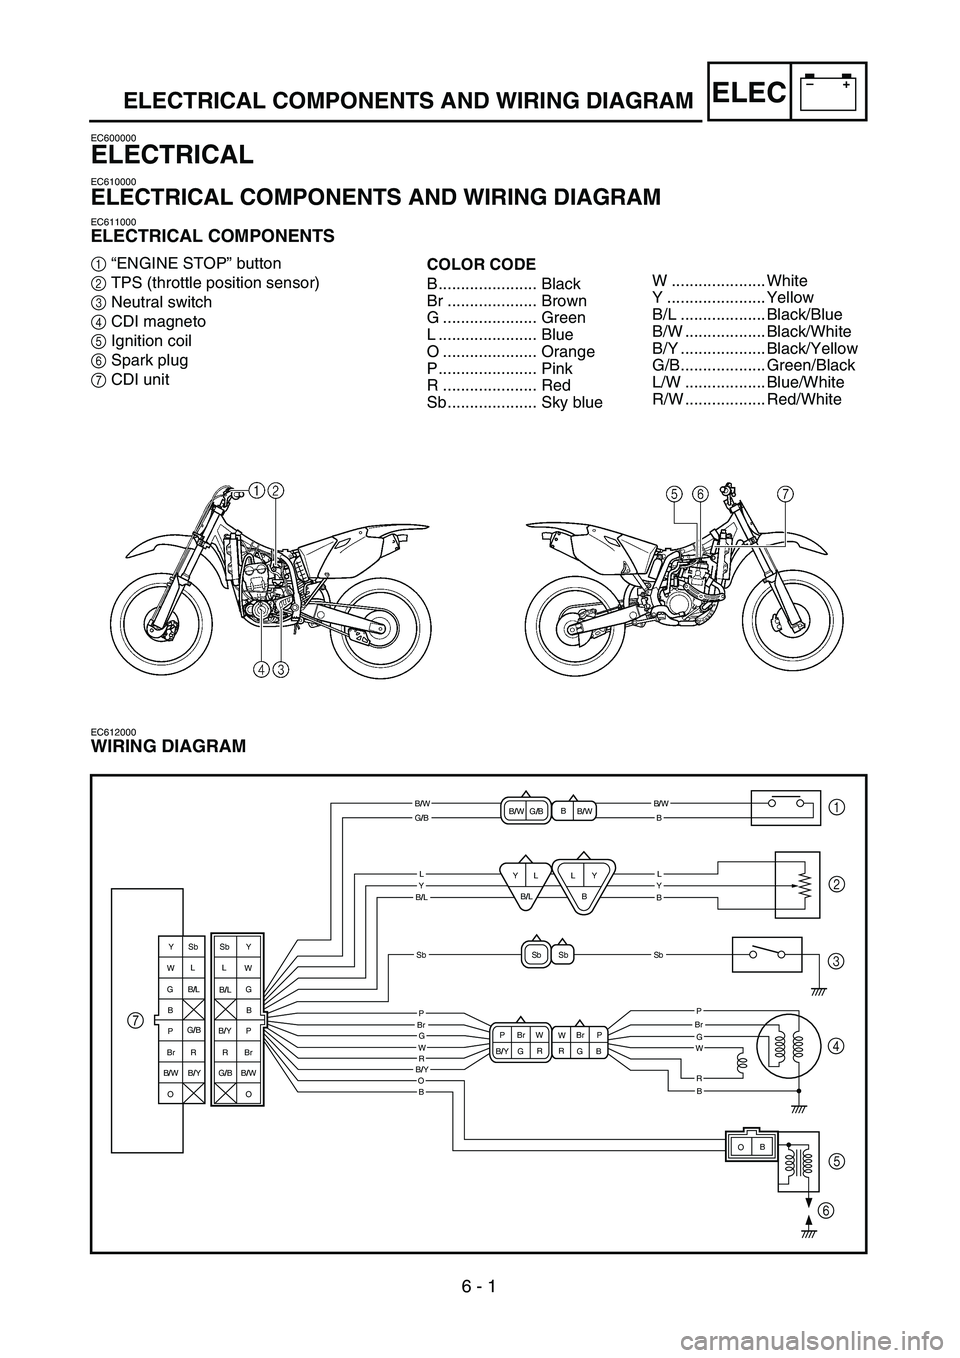 YAMAHA YZ450F 2004 User Guide 6 - 1
–+ELECELECTRICAL COMPONENTS AND WIRING DIAGRAM
EC600000
ELECTRICAL
EC610000
ELECTRICAL COMPONENTS AND WIRING DIAGRAM
EC611000
ELECTRICAL COMPONENTS
1“ENGINE STOP” button
2TPS (throttle pos